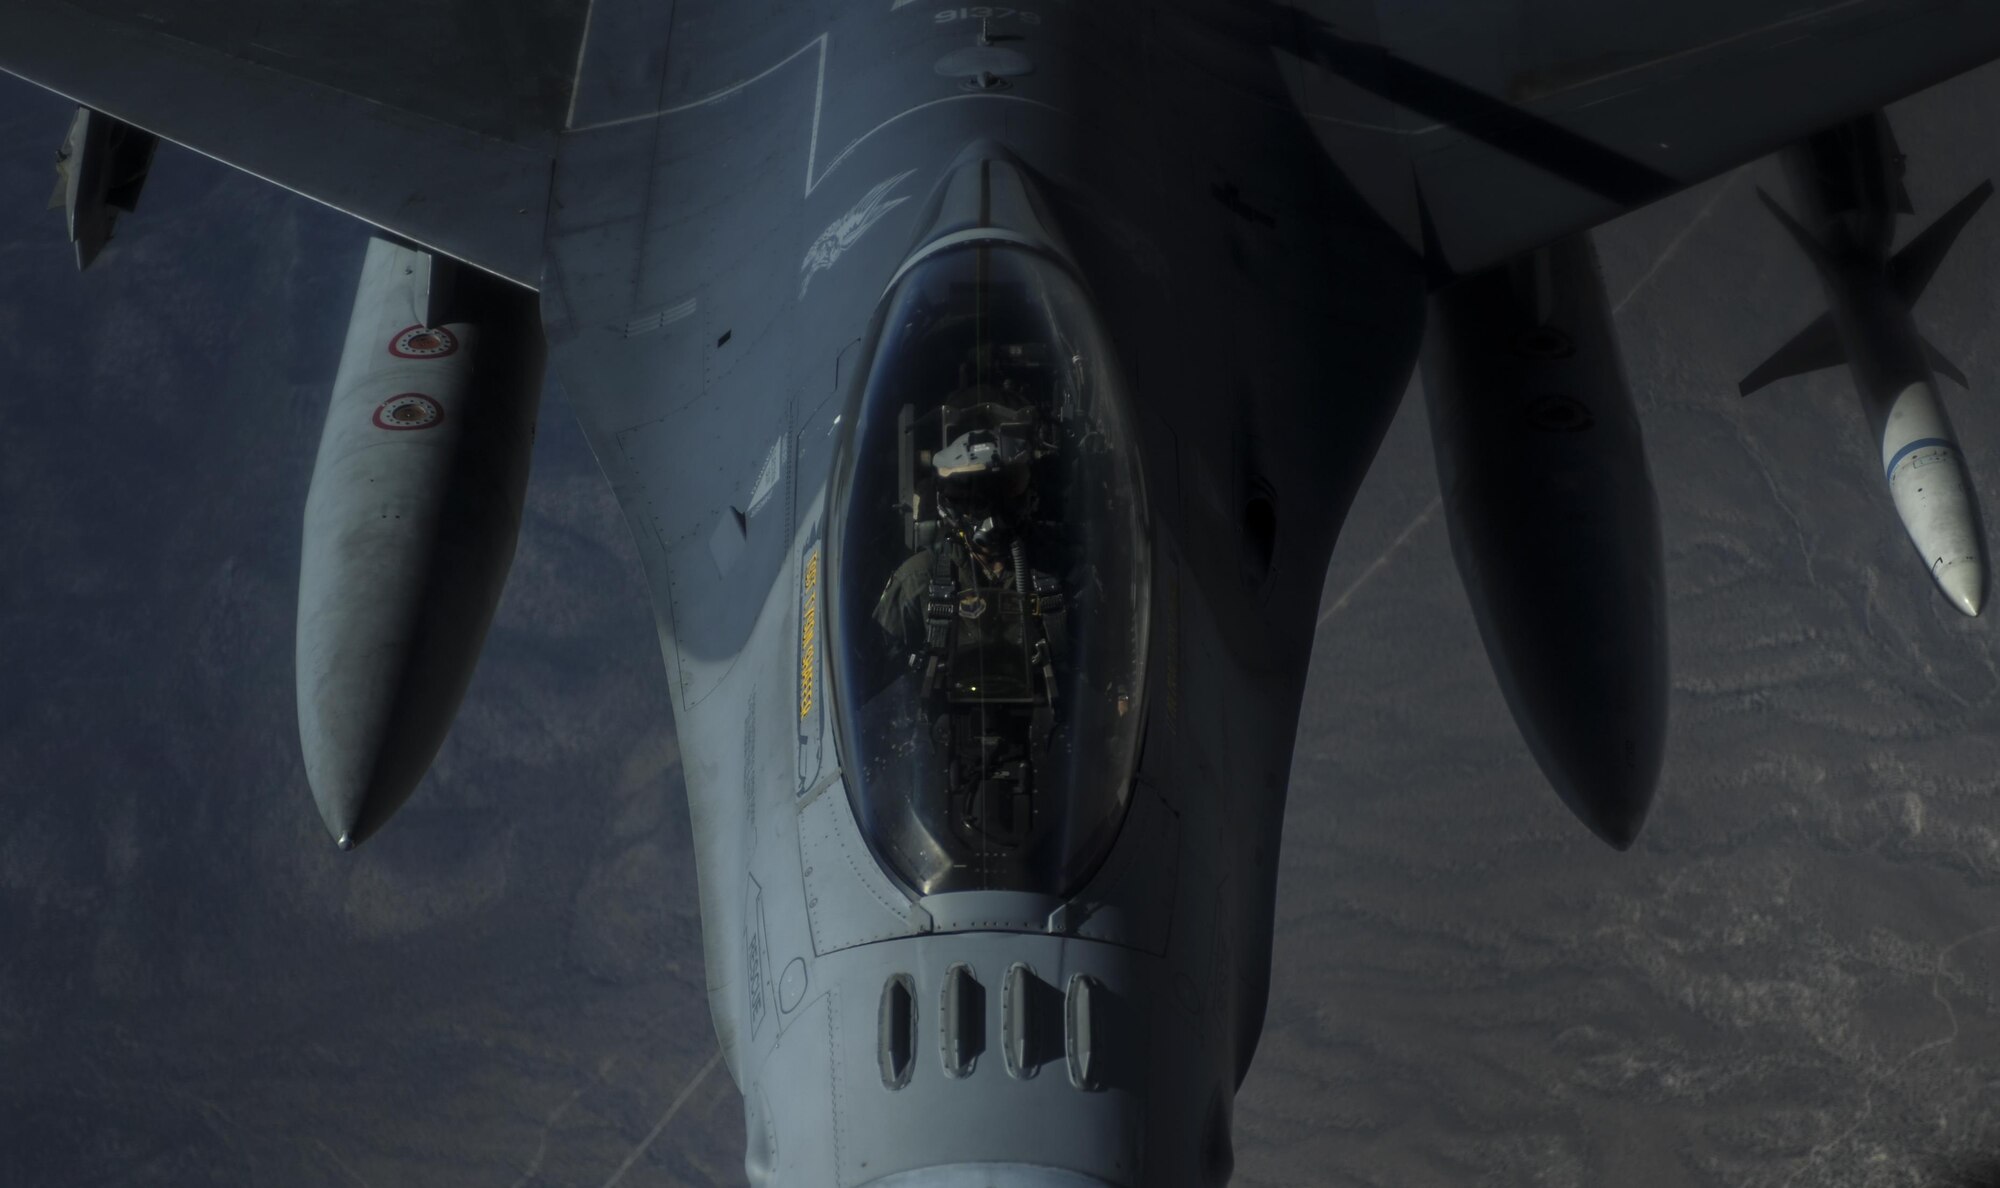 An F-16CJ pilot assigned to the 79th Fighter Squadron, Shaw Air Force Base, S.C., waits as the jet receives mid-air refueling during Red Flag 16-3 over the Nevada Test and Training Range, July 27, 2016. Red Flag was established in 1975 as one initiative of directed by General Robert J. Dixon, then commander of the Tactical Air Command, to better prepare U.S. forces for combat. (U.S. Air Force photo by Airman 1st Class Kevin Tanenbaum/Released)